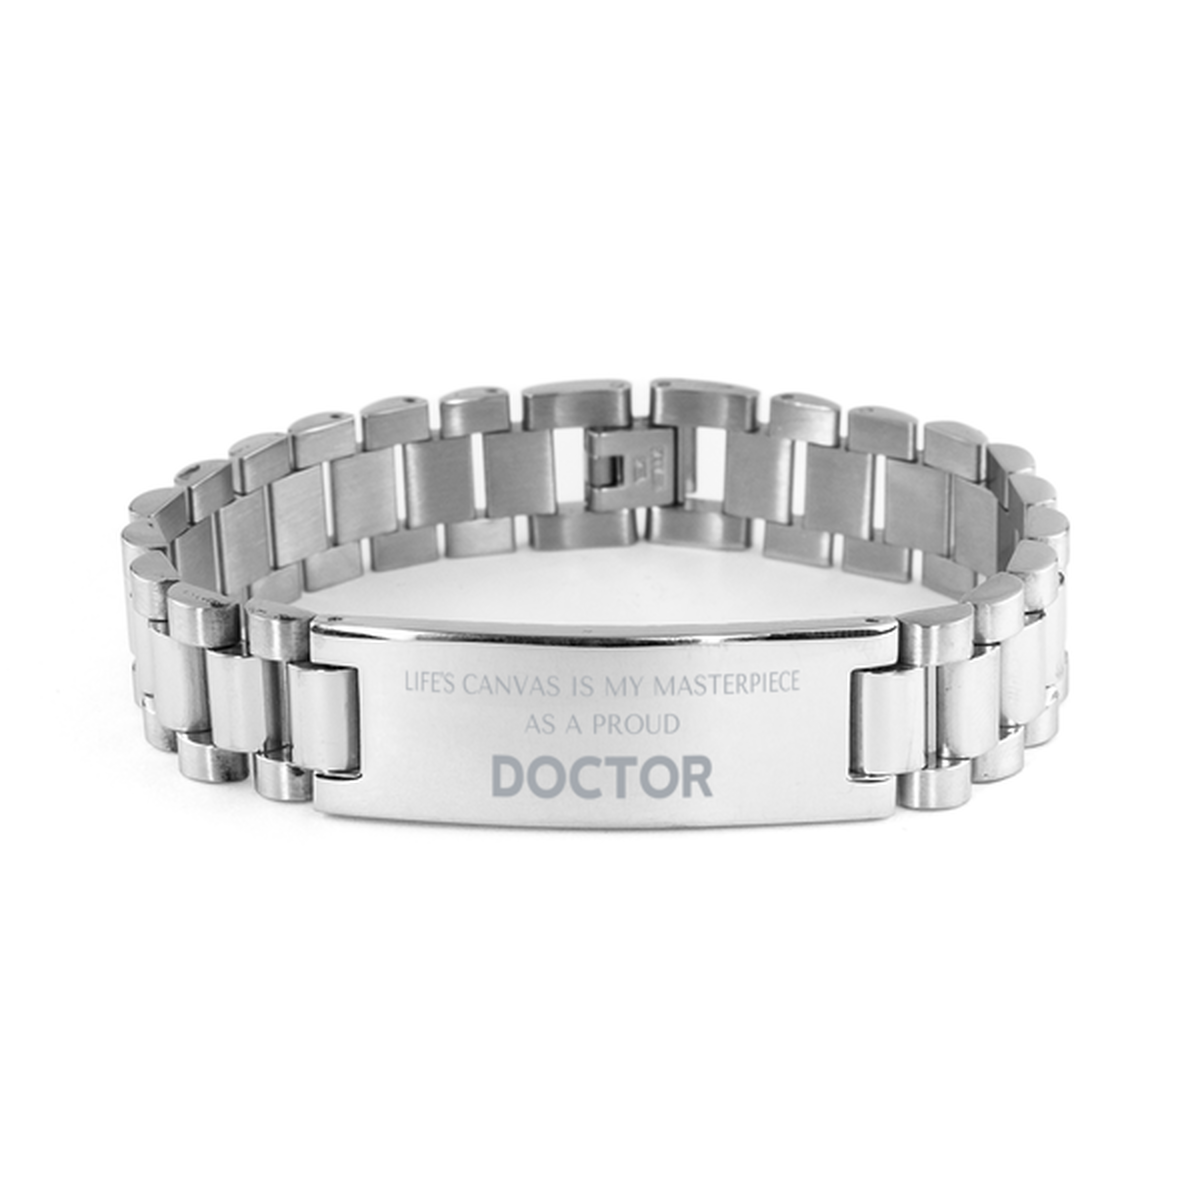 Proud Doctor Gifts, Life's canvas is my masterpiece, Epic Birthday Christmas Unique Ladder Stainless Steel Bracelet For Doctor, Coworkers, Men, Women, Friends